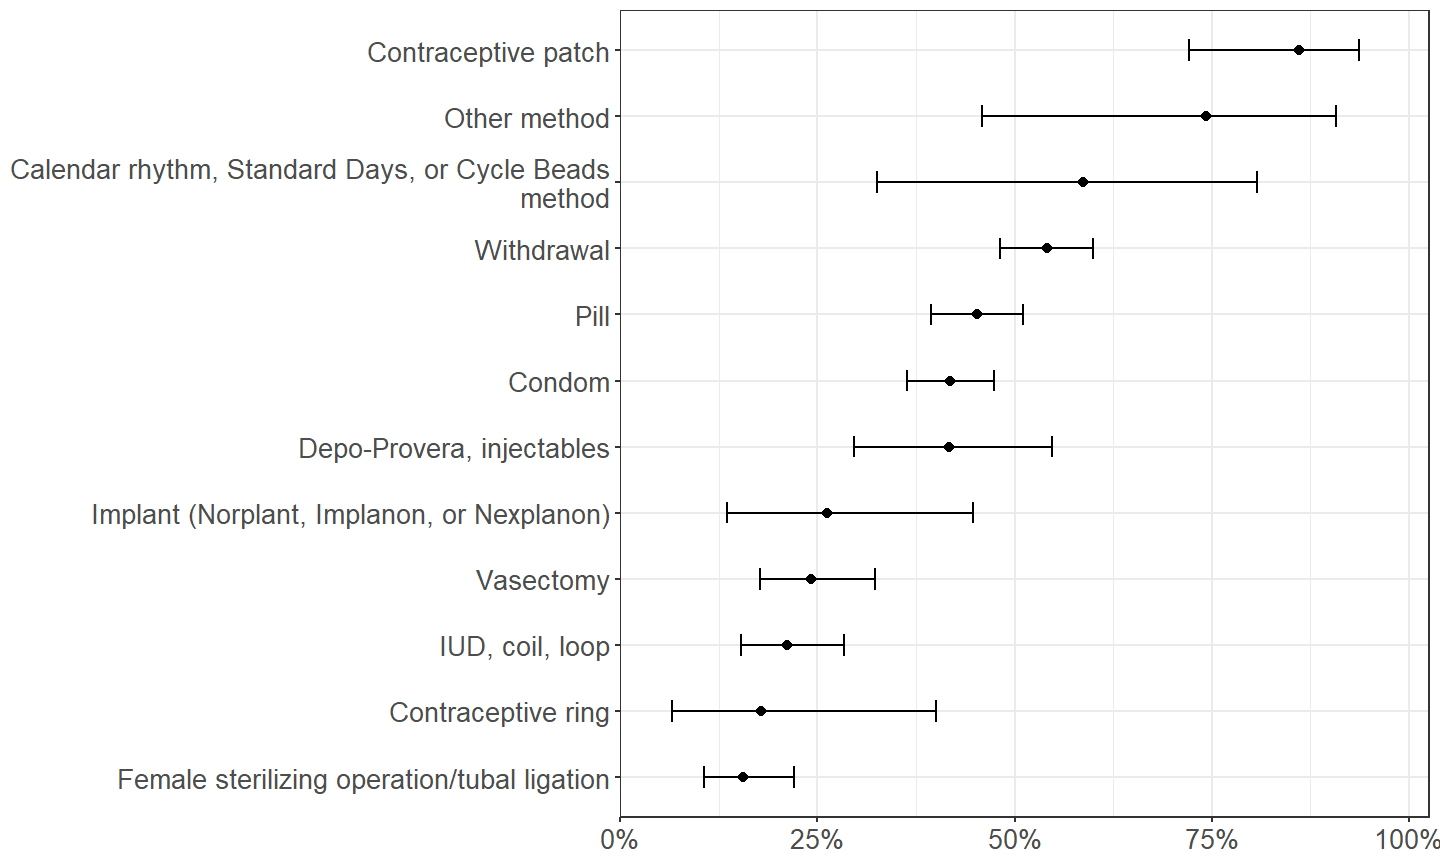 Proportion using another method of contraception among males using each method of contraception during last intercourse with a female in the past 3 months.